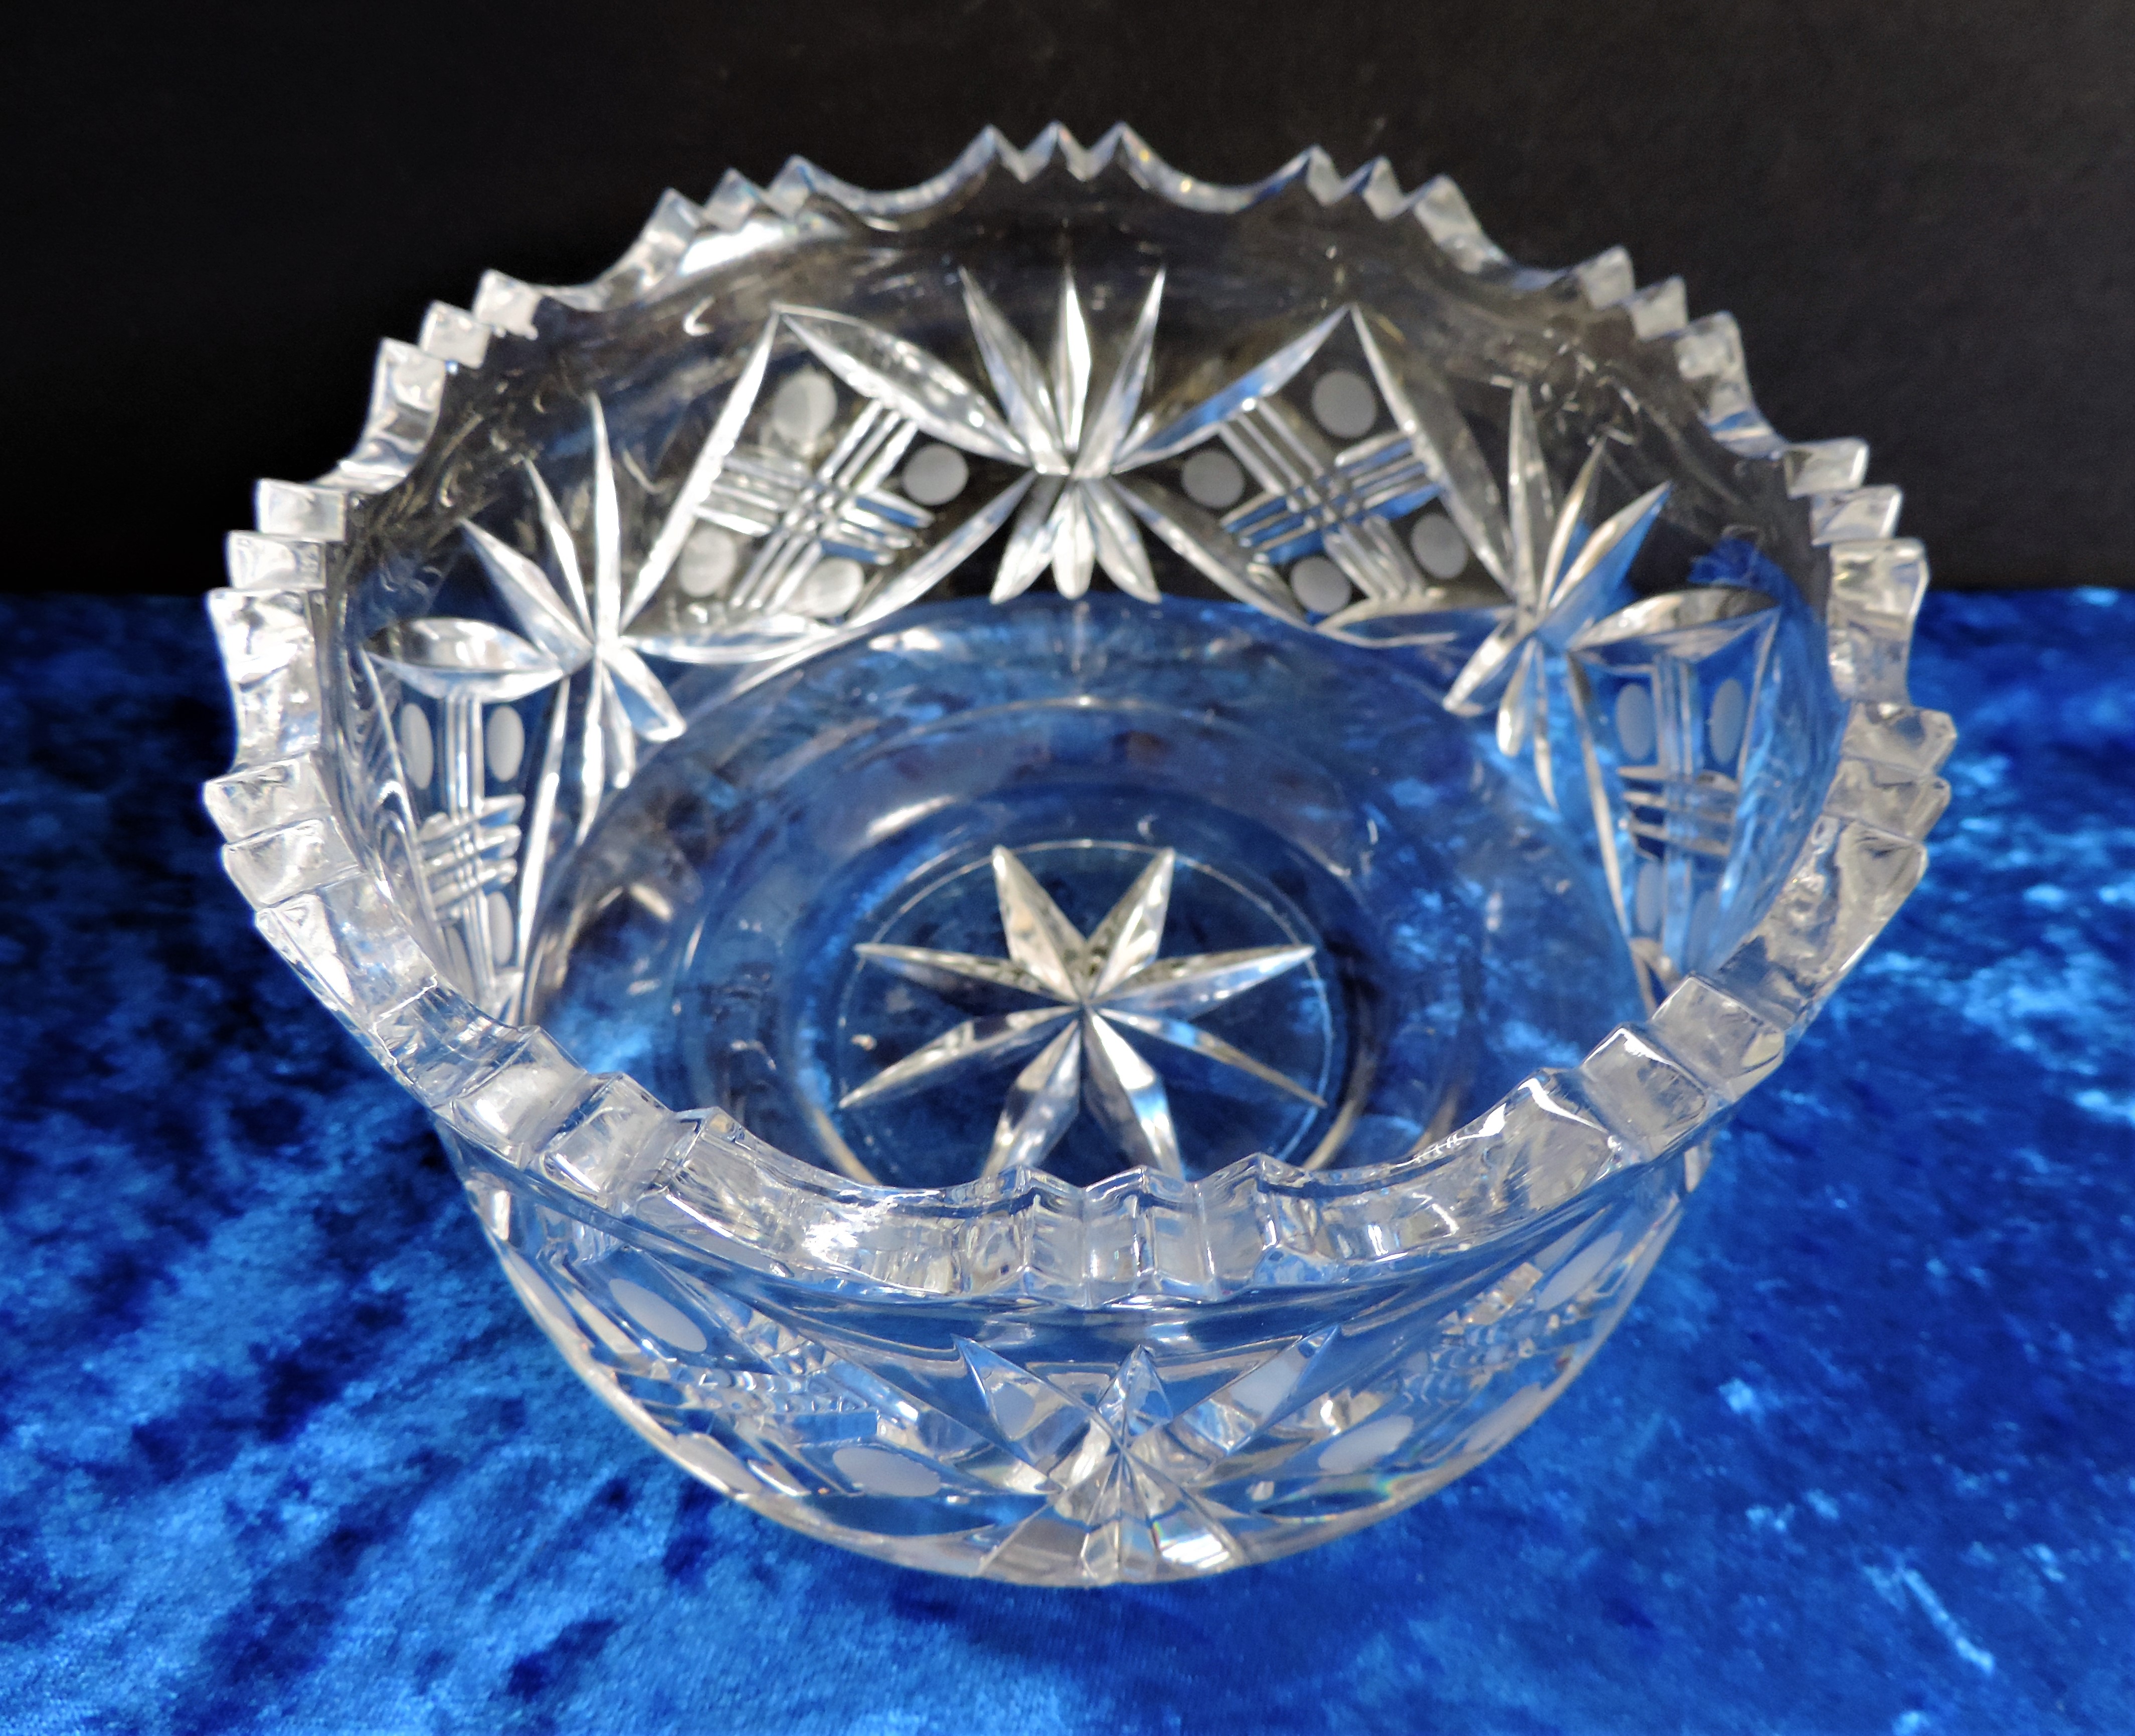 Vintage Etched and Cut Crystal Bowl - Image 2 of 4